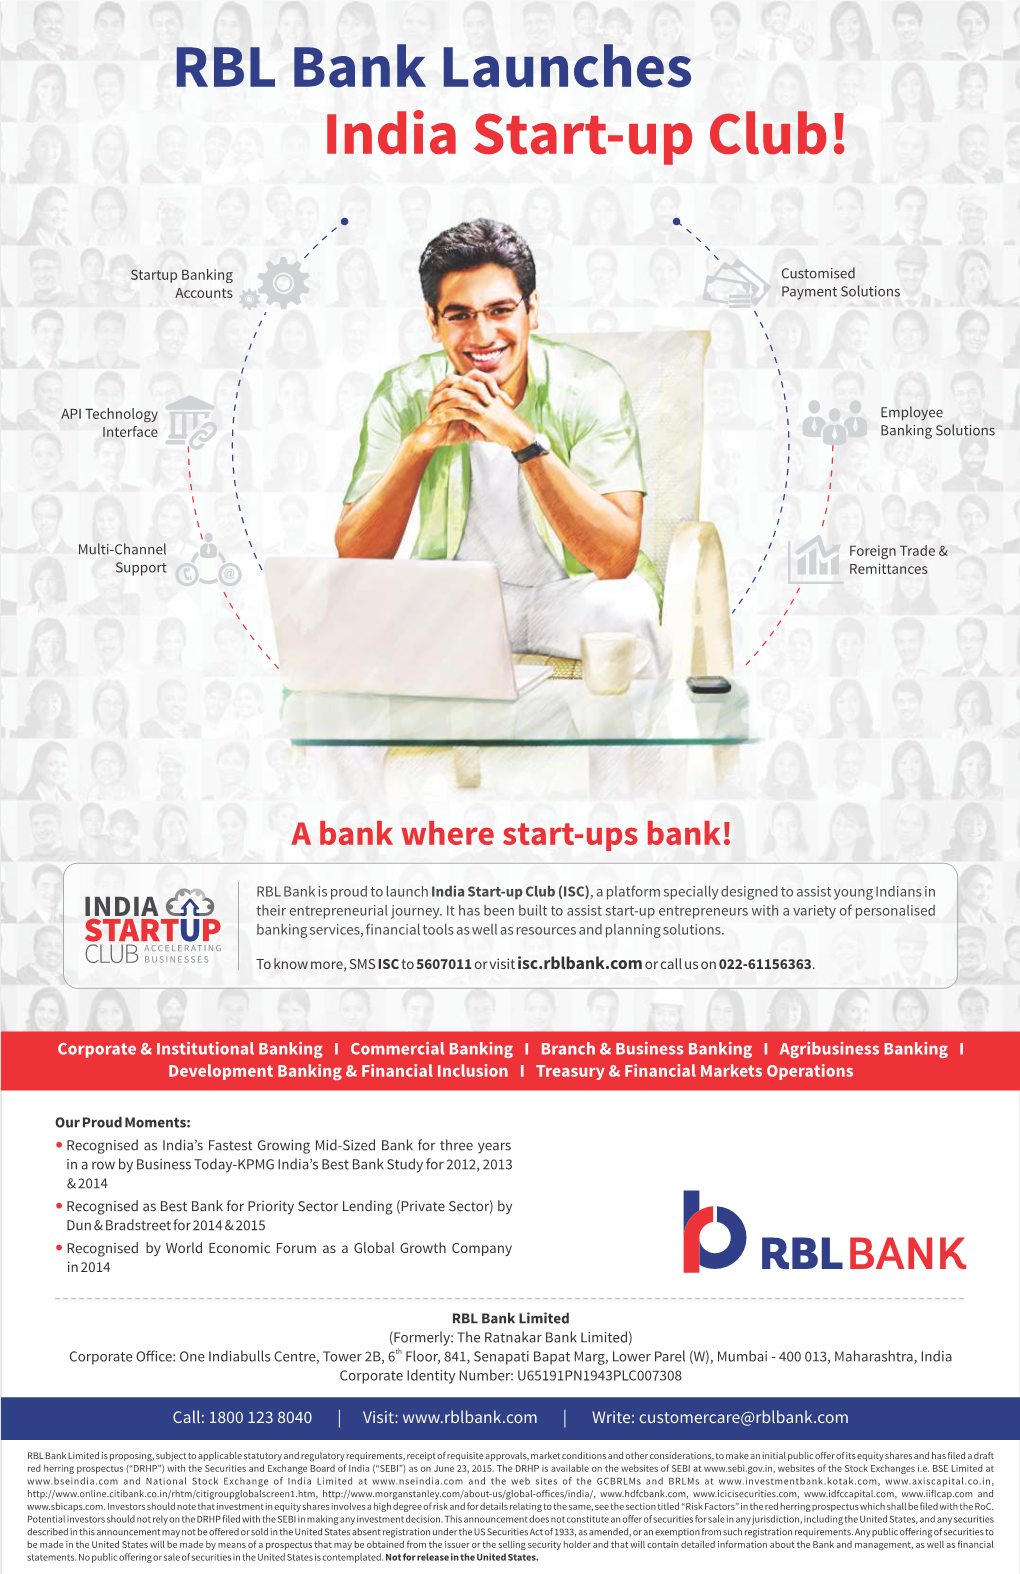 RBL Bank Launches India Start-Up Club!